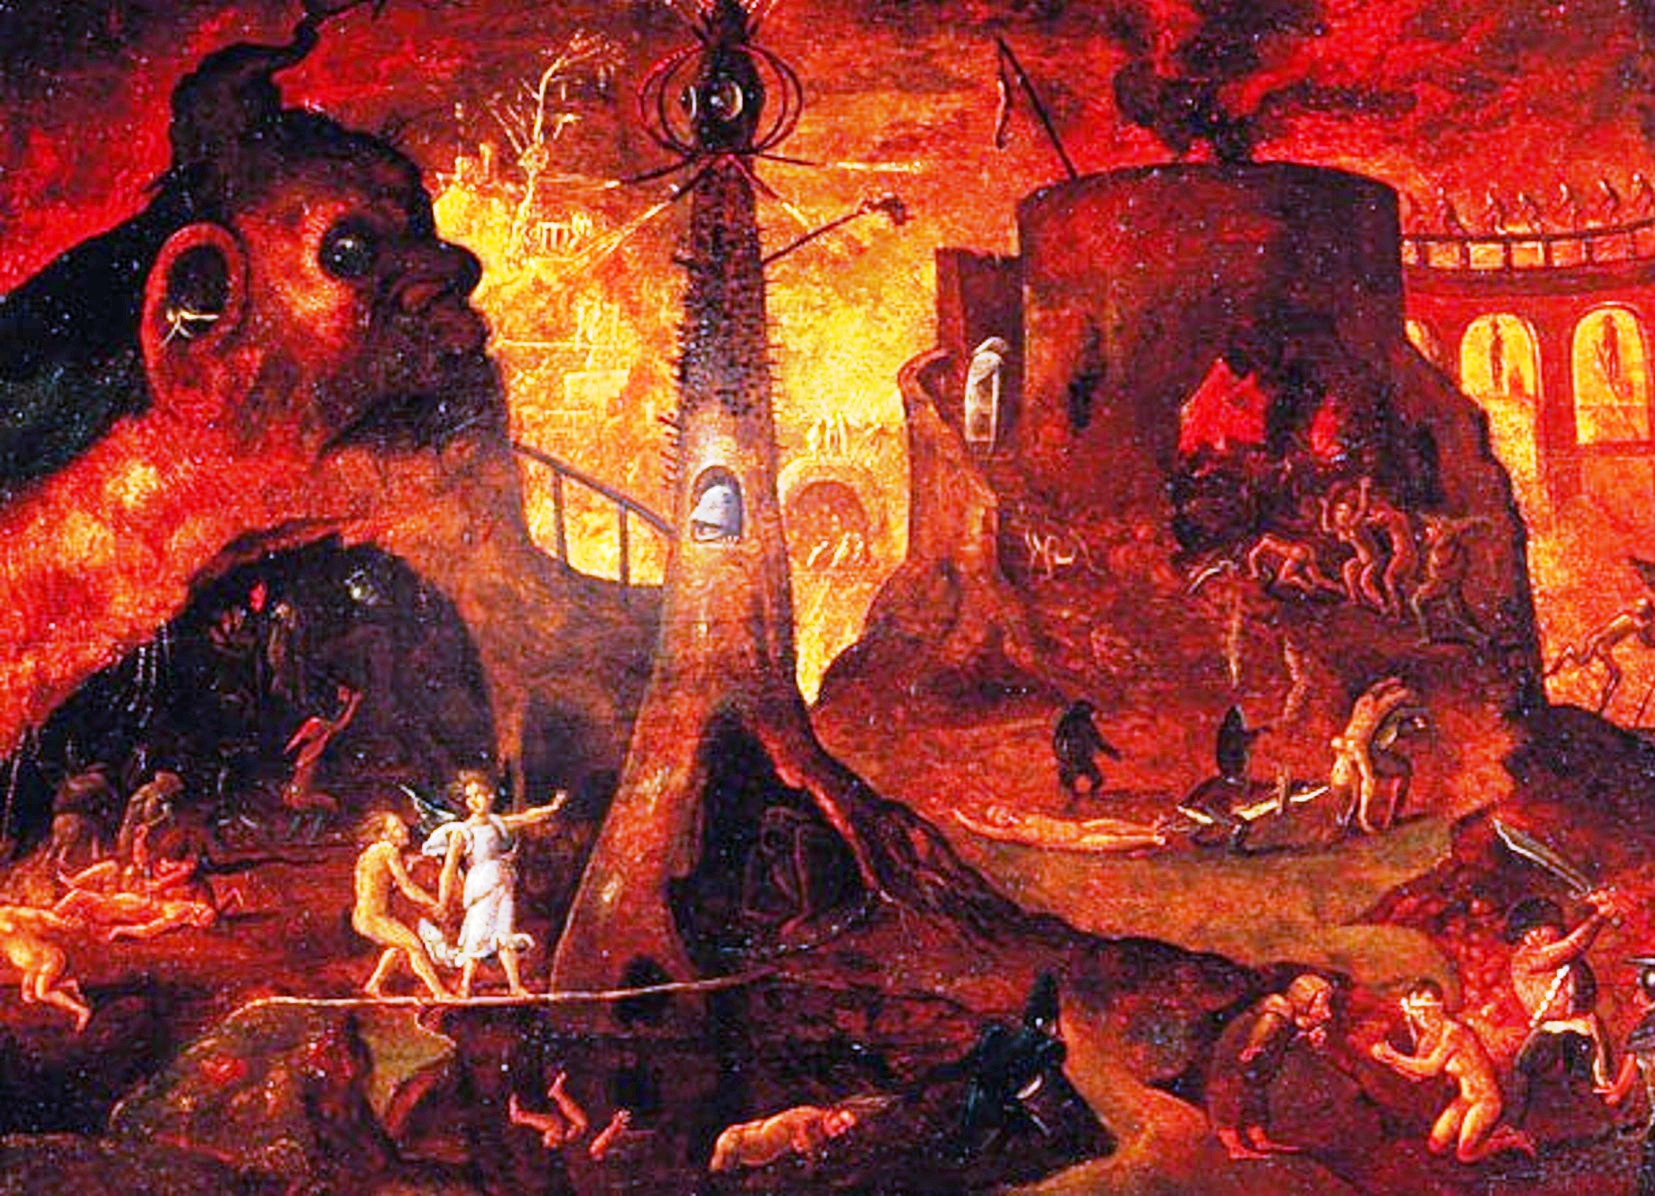 Concerning Hell and Final Judgment